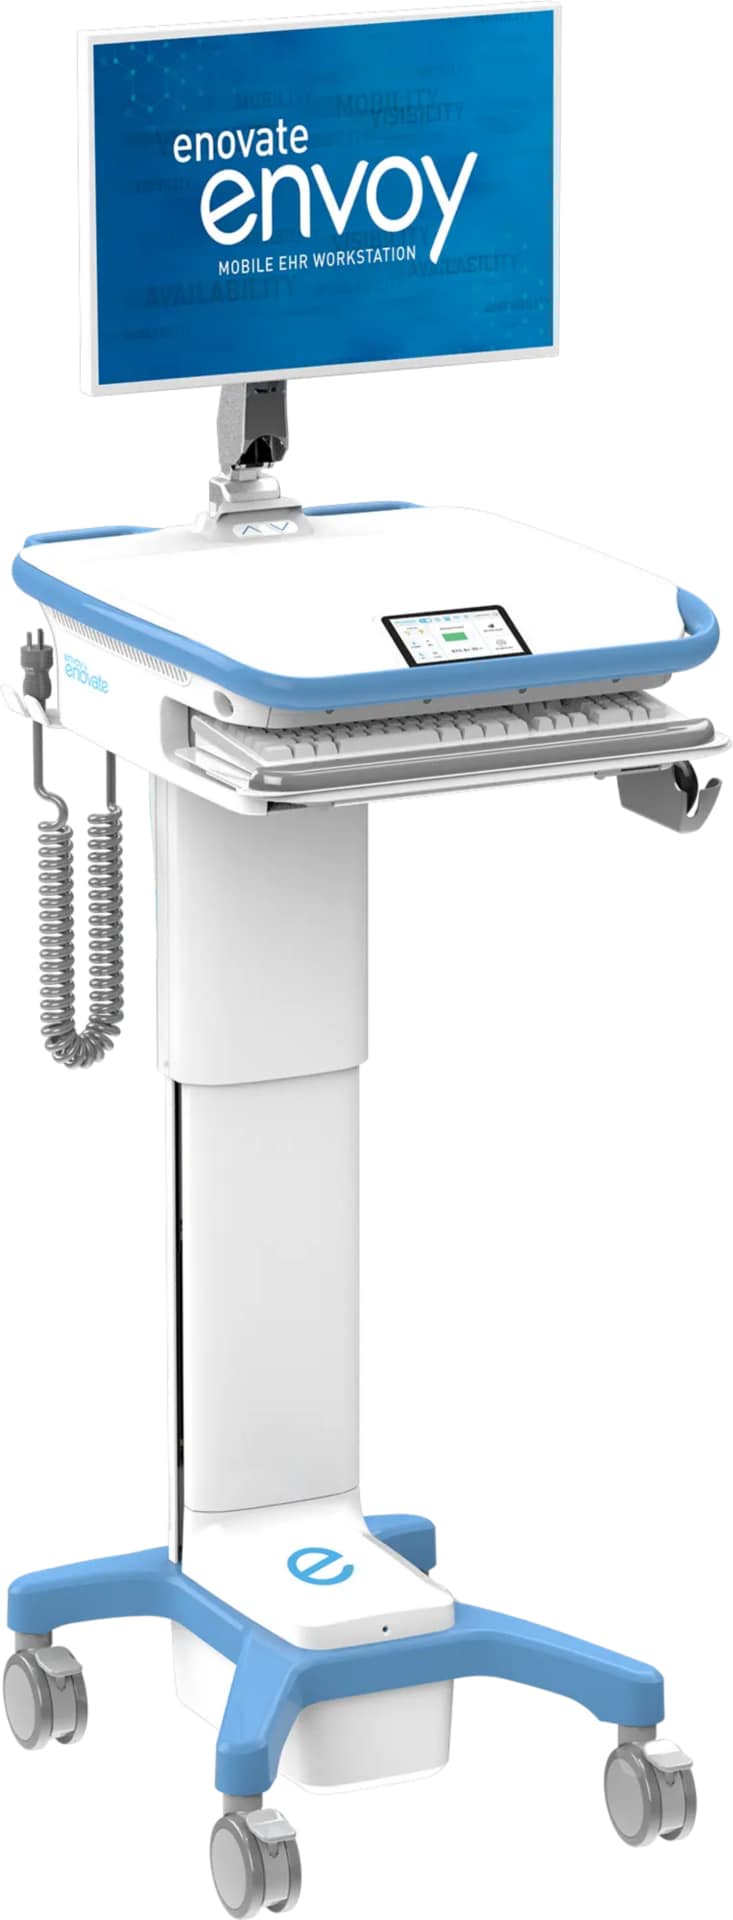 Enovate Medical Envoy 2.0 Corded Mobile Workstation with Straight AutoTrax Steering System